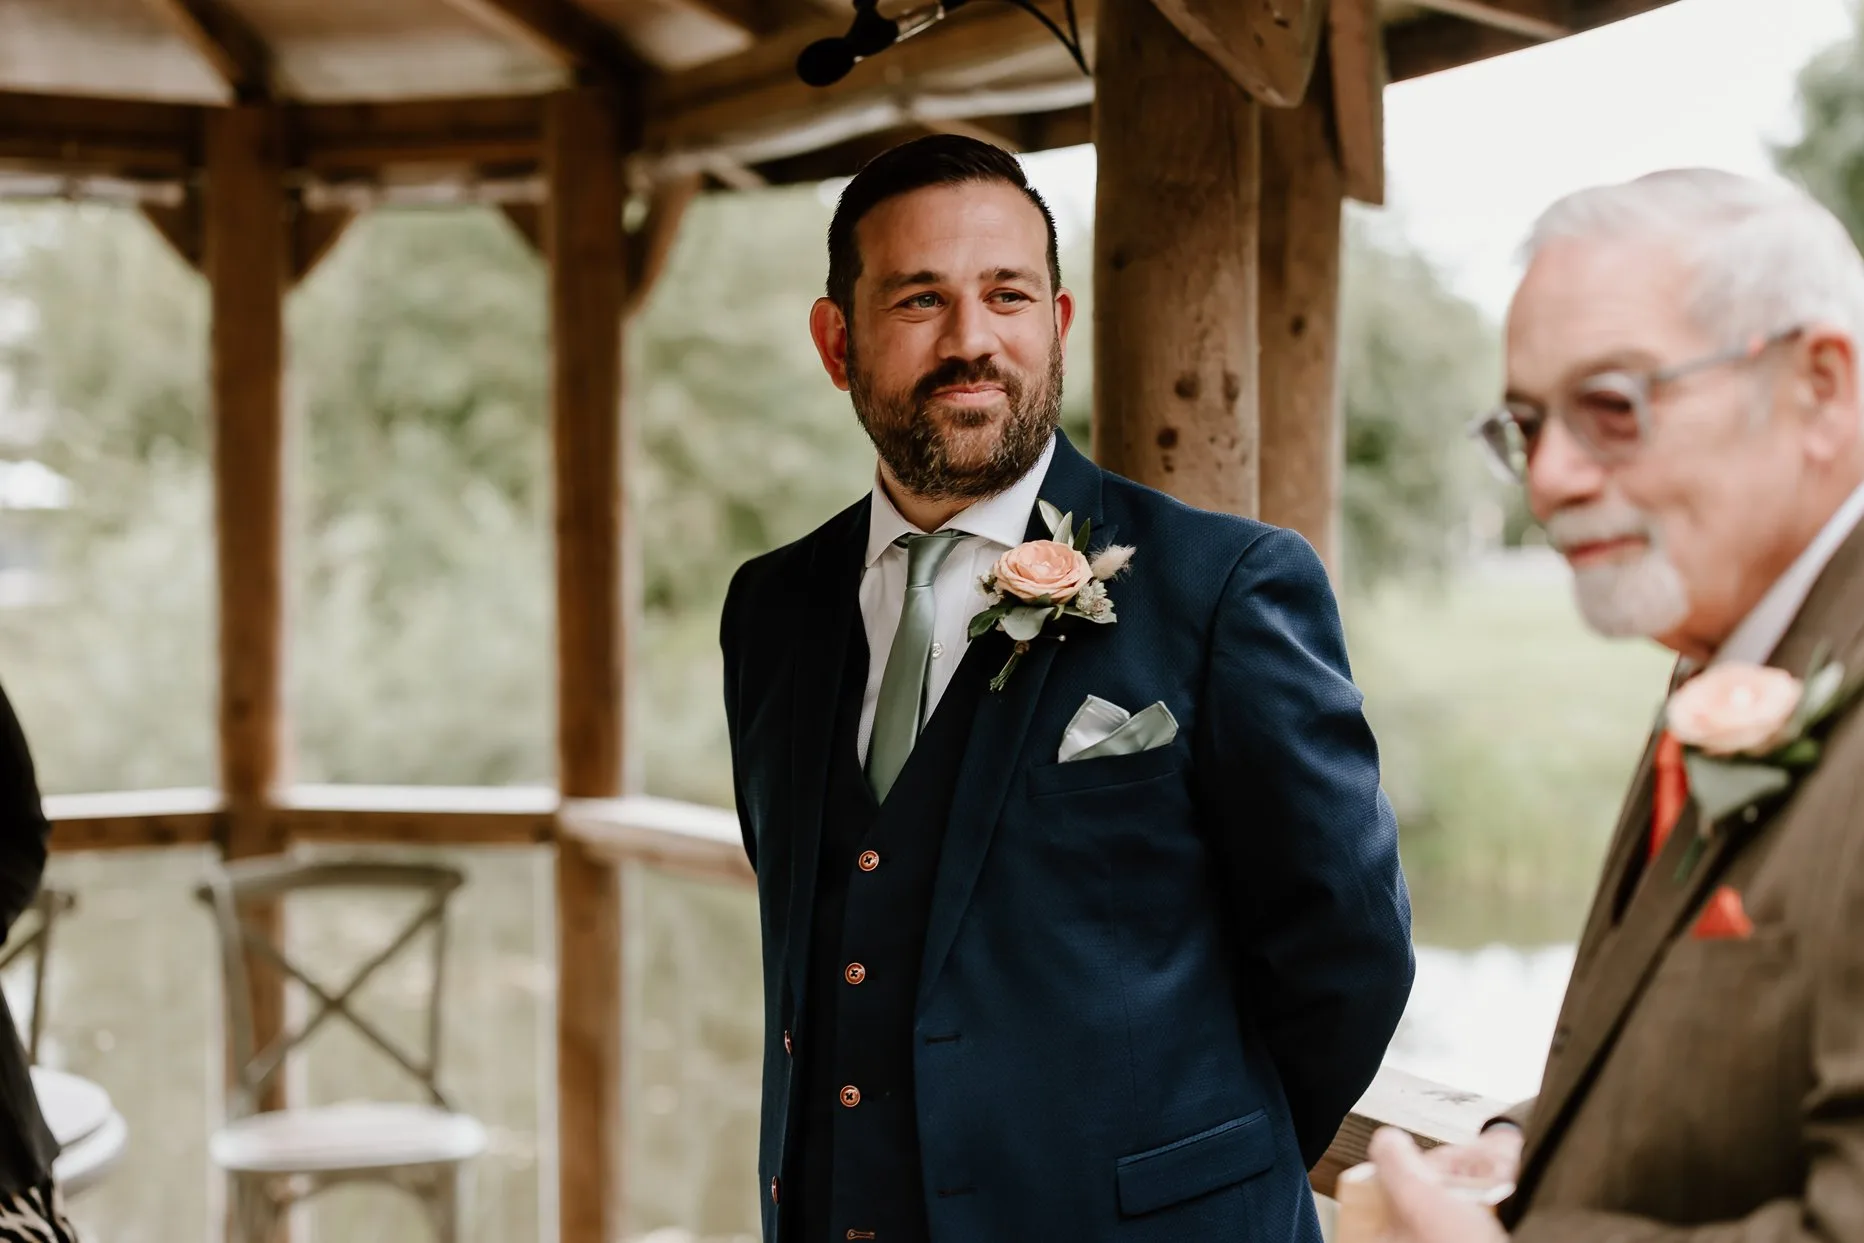 Groom waiting for his bride at the pavilion outdoor ceremony area at Oaklands. He is smiling and wearing a navy blue suit with blush pink buttonhole.